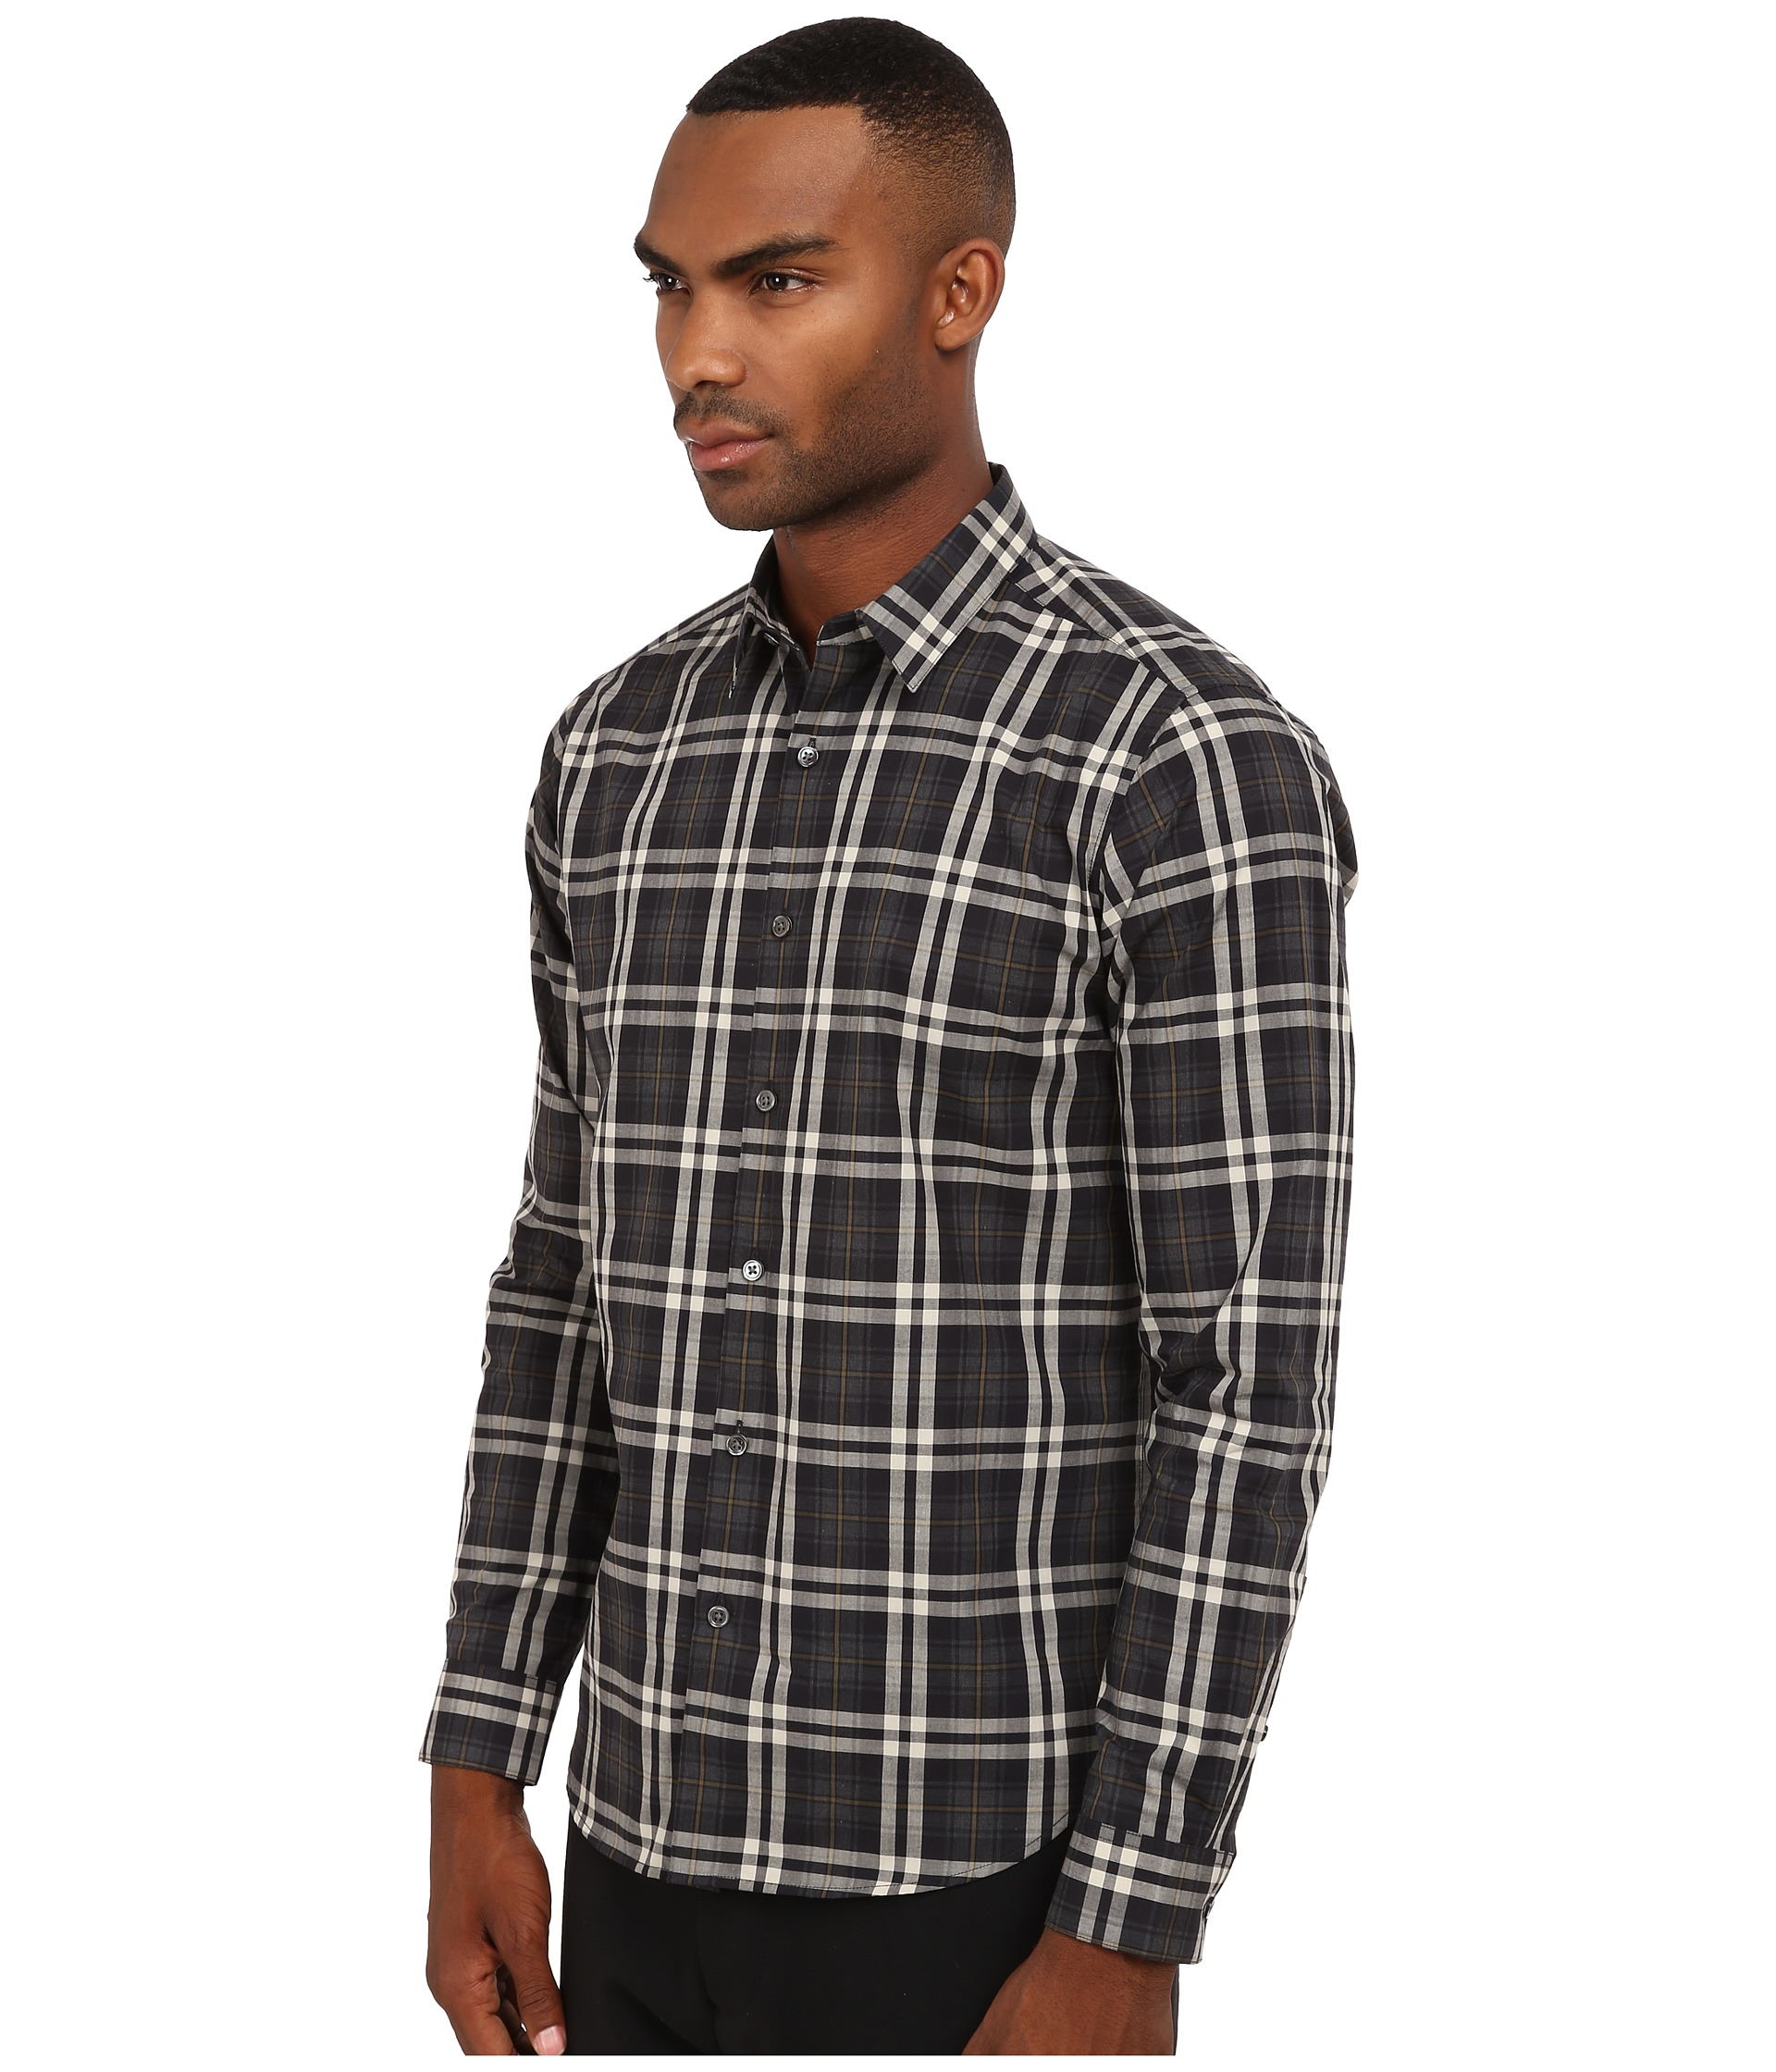 Theory Zack.winterton Button Up in Gray for Men - Lyst